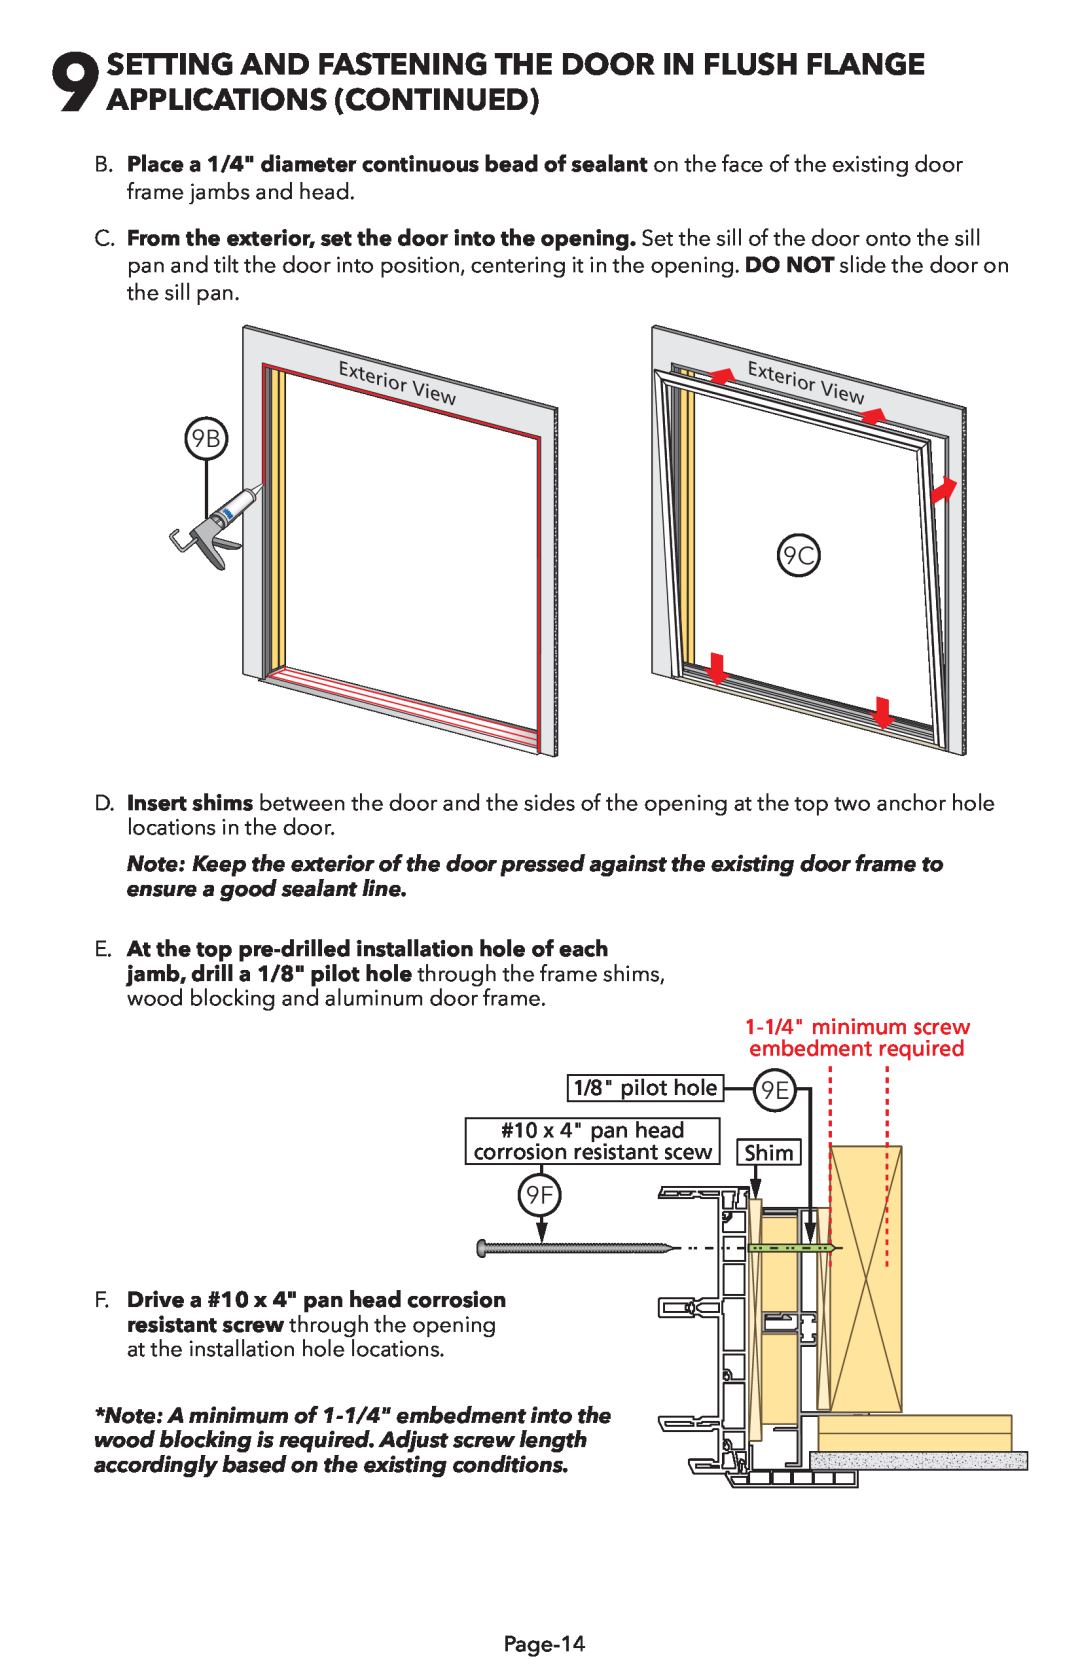 Pella V983492 9SETTINg AND fASTENINg ThE DOOR IN fLUSh fLANgE, Applications Continued, Exterior View 9B 